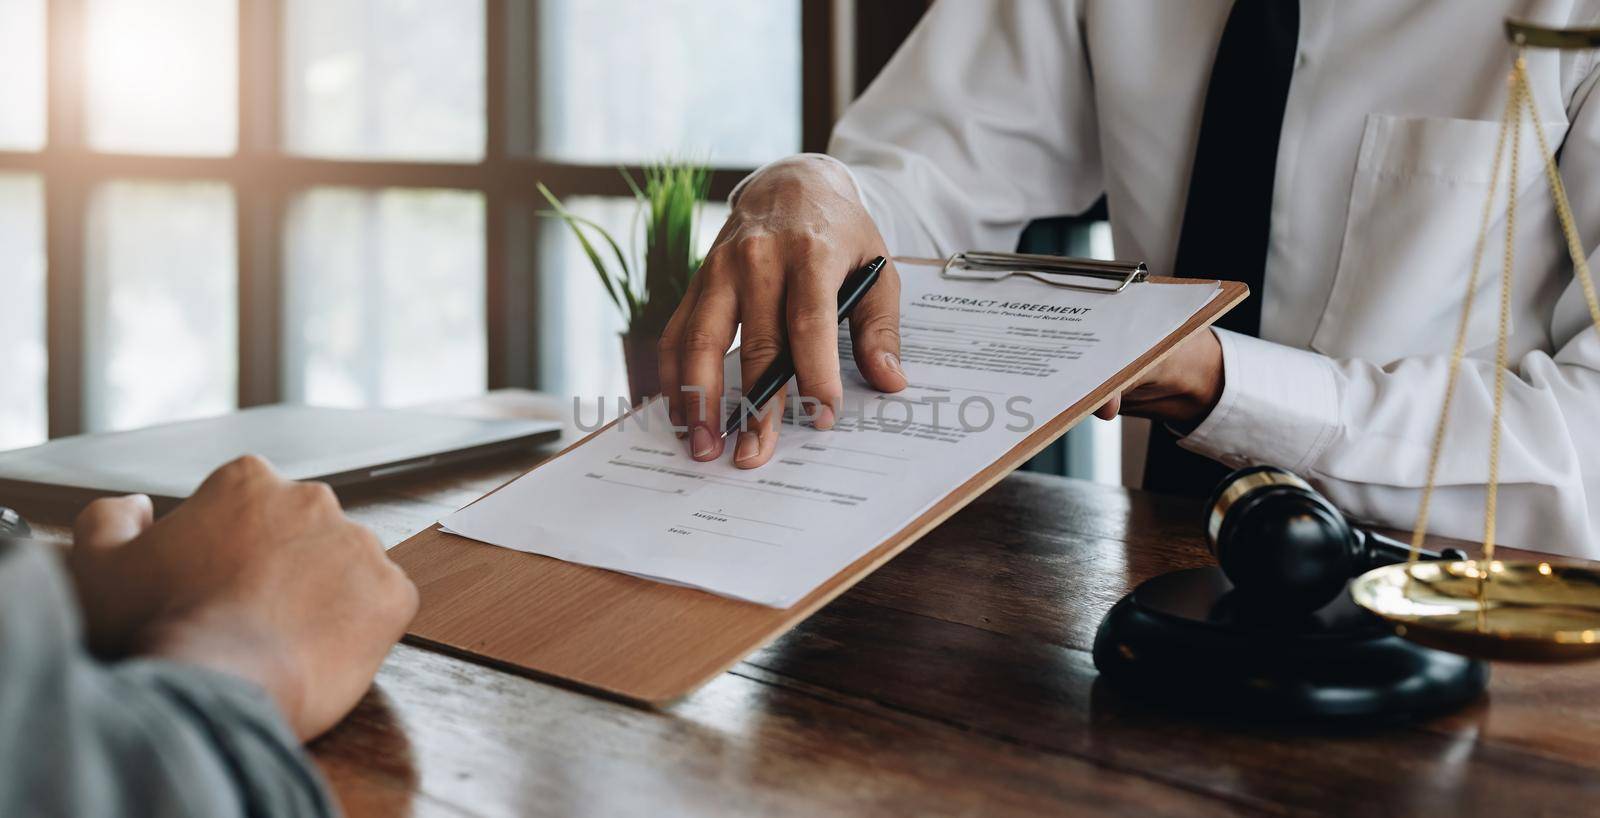 legal consultants, notary or justice lawyer discussing contract document on desk with client customer in courtroom office, business, justice law, insurance, legal service, buy and sell house concept.